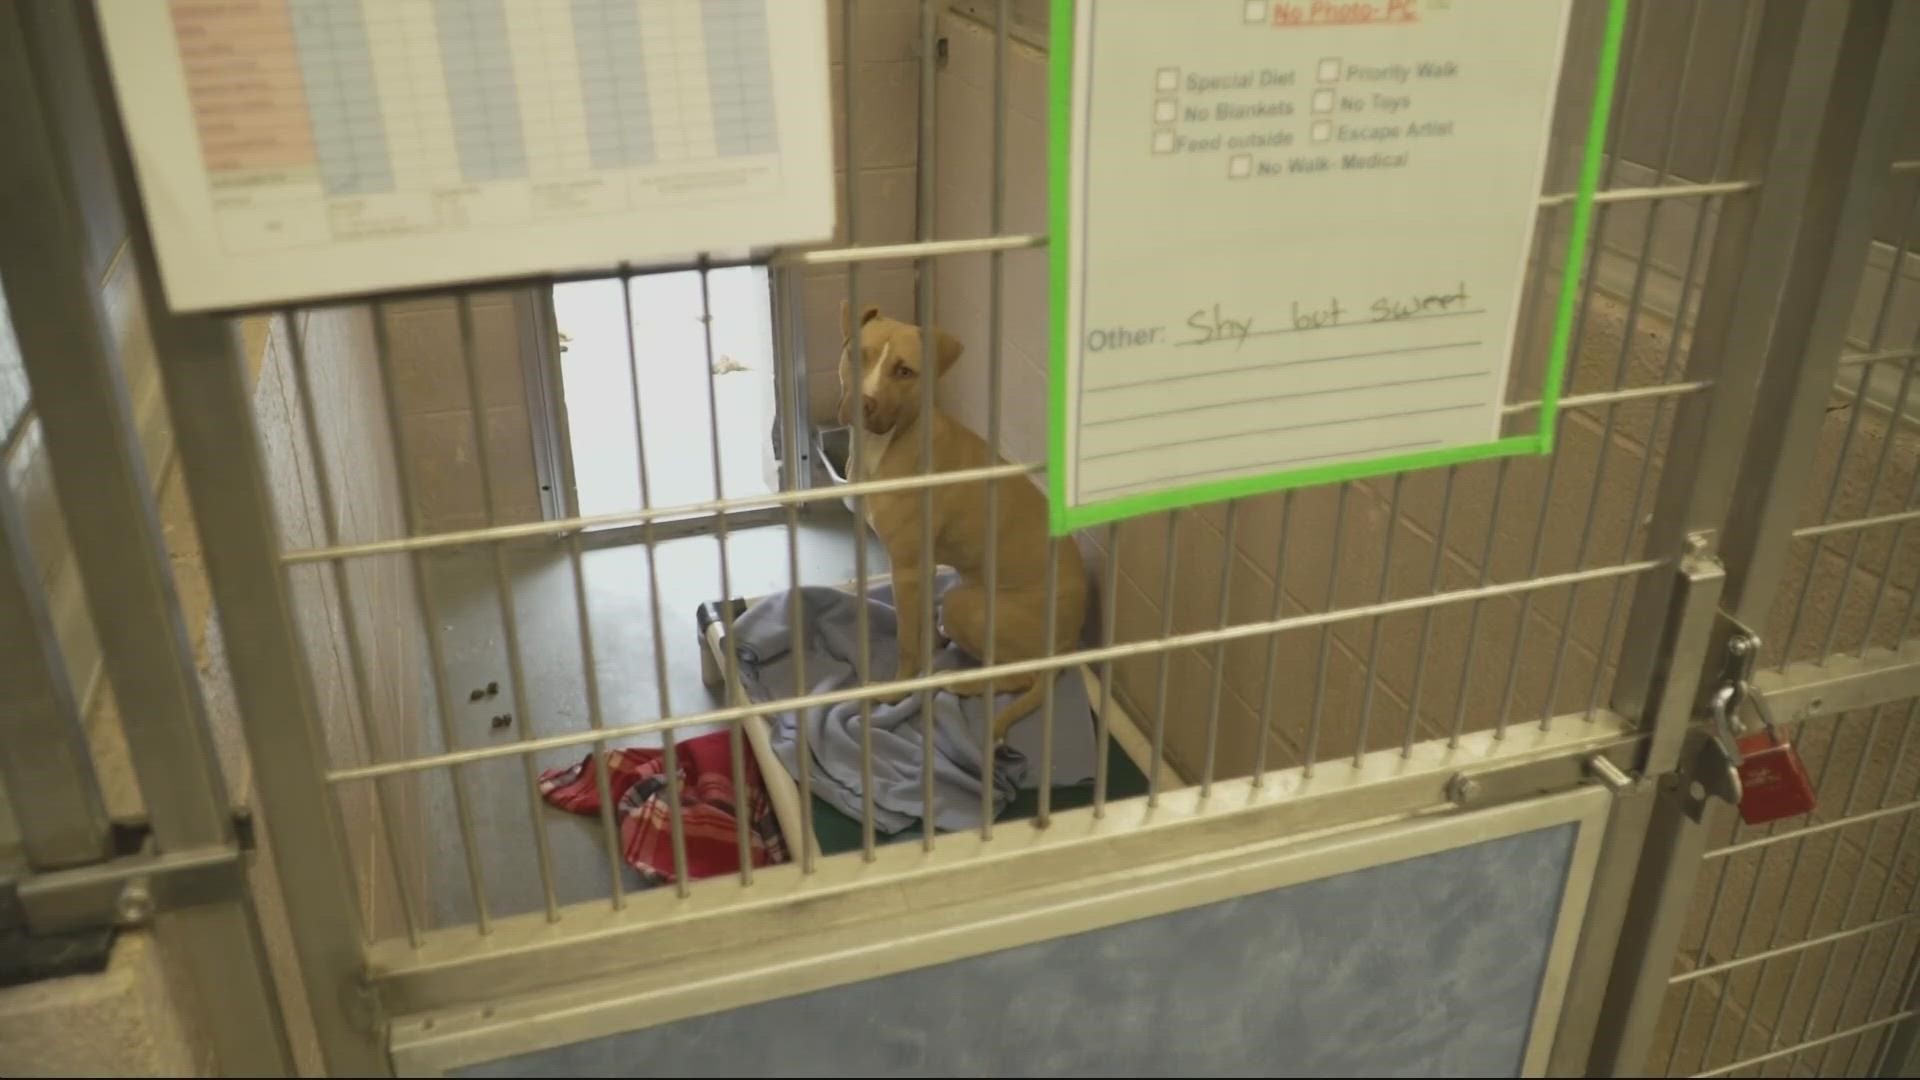 Audits found the county animal shelter was falling below national standards for basic care. The shelter blamed hurdles like COVID and staff shortages.